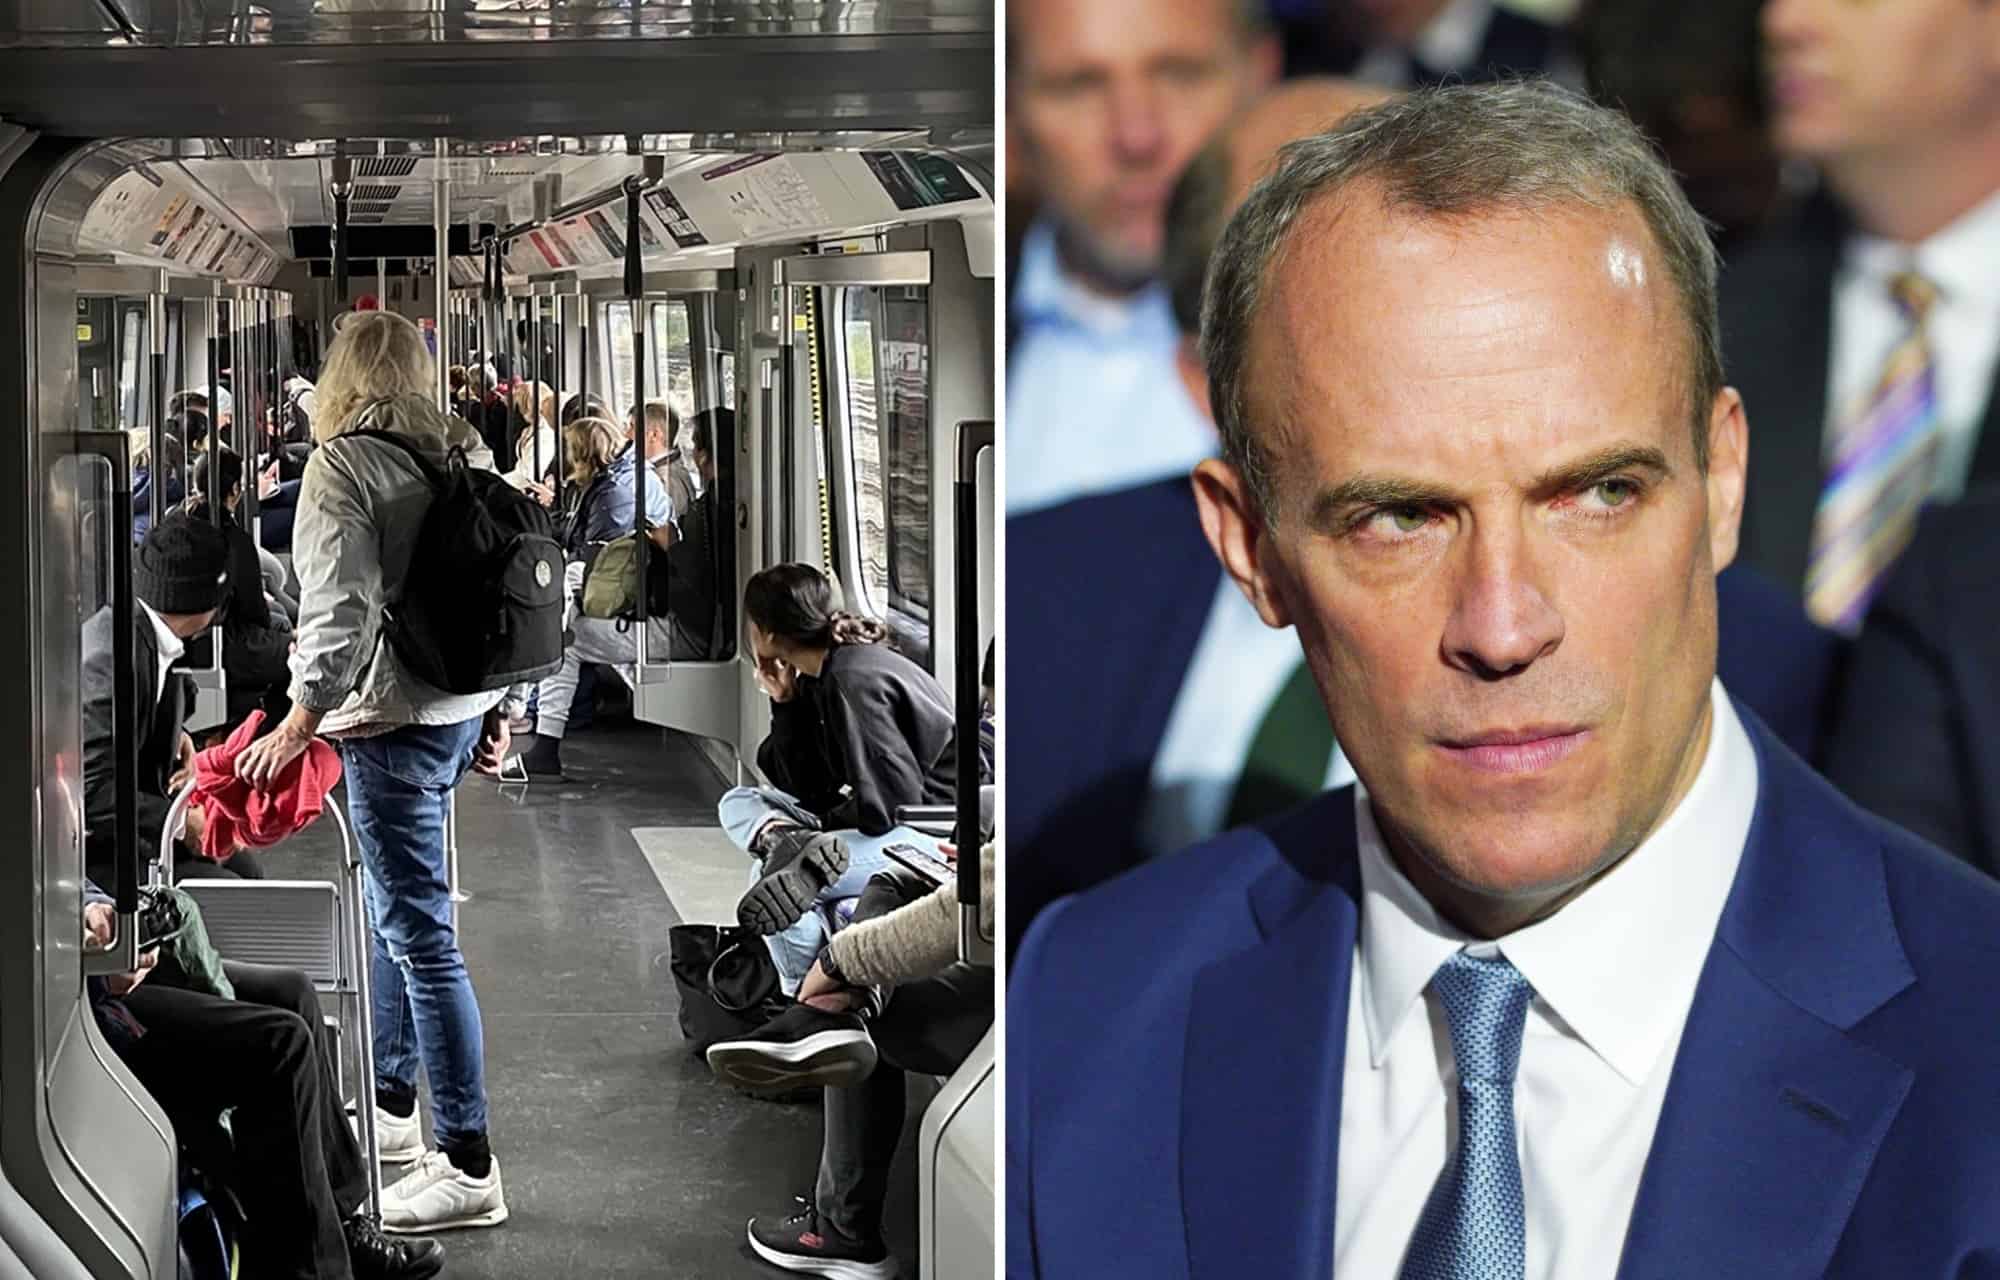 Train burst into applause after Raab quits